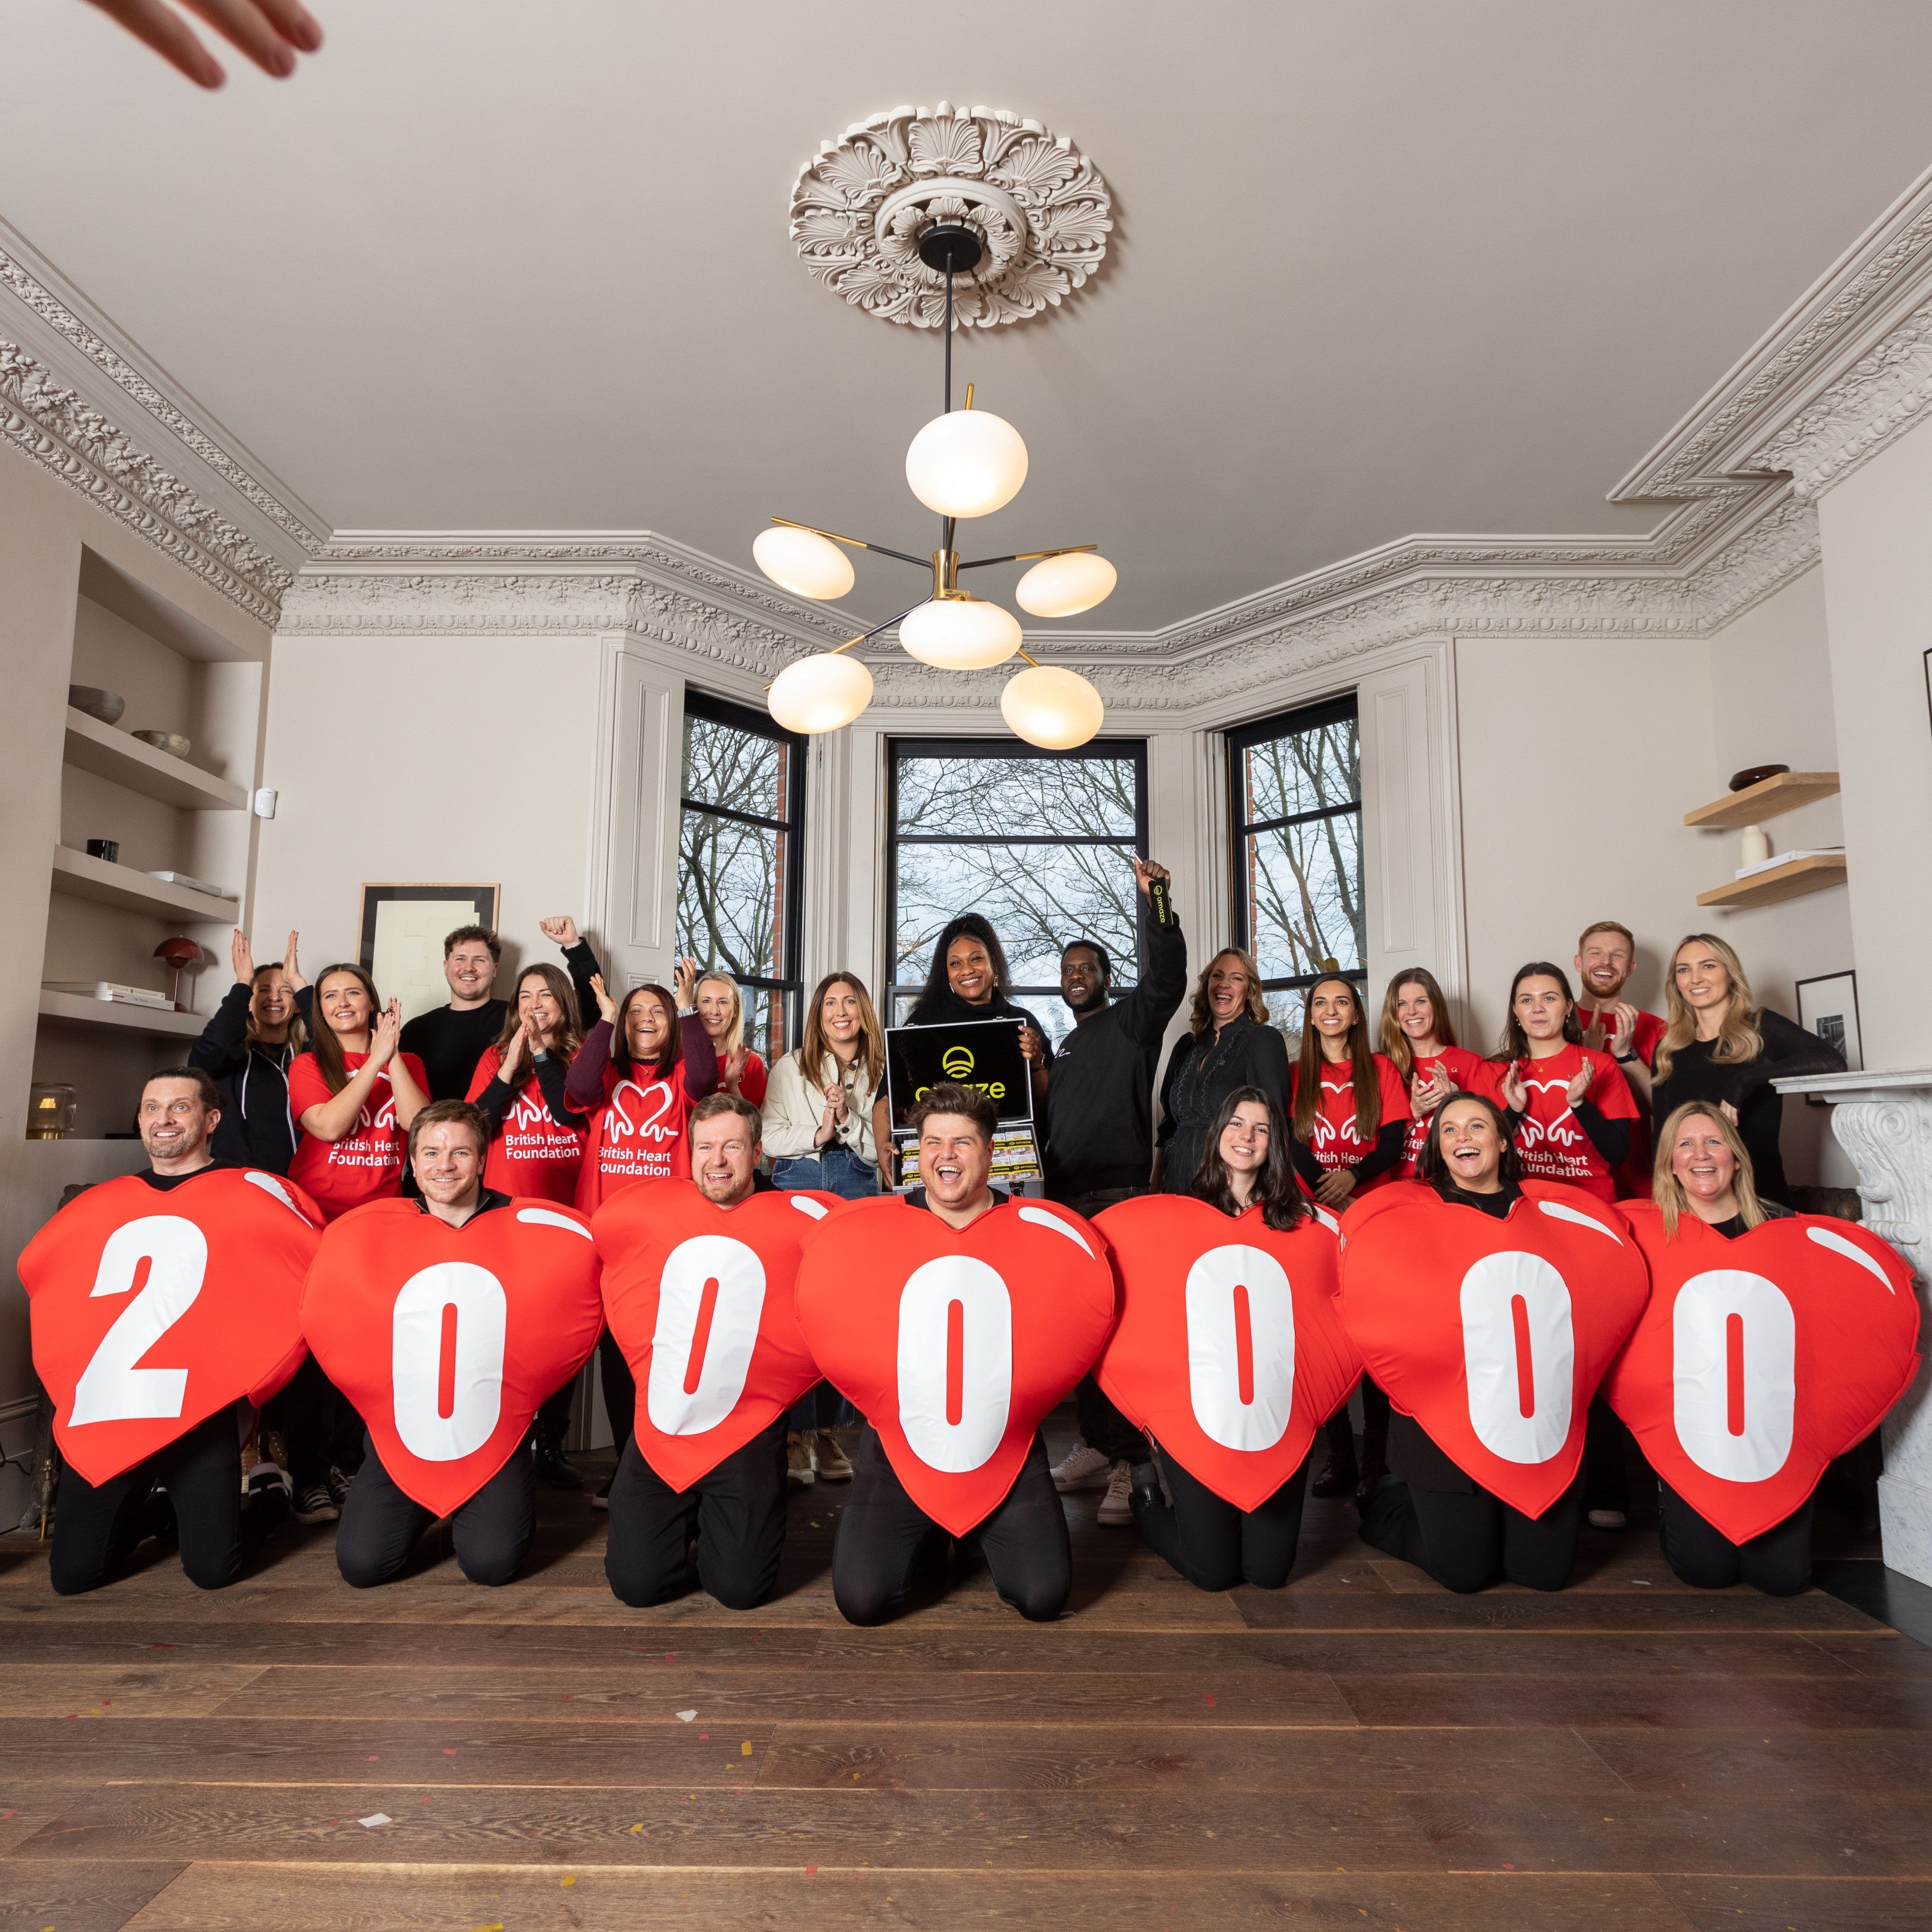 Together We Have Raised £3,000,000 for British Heart Foundation